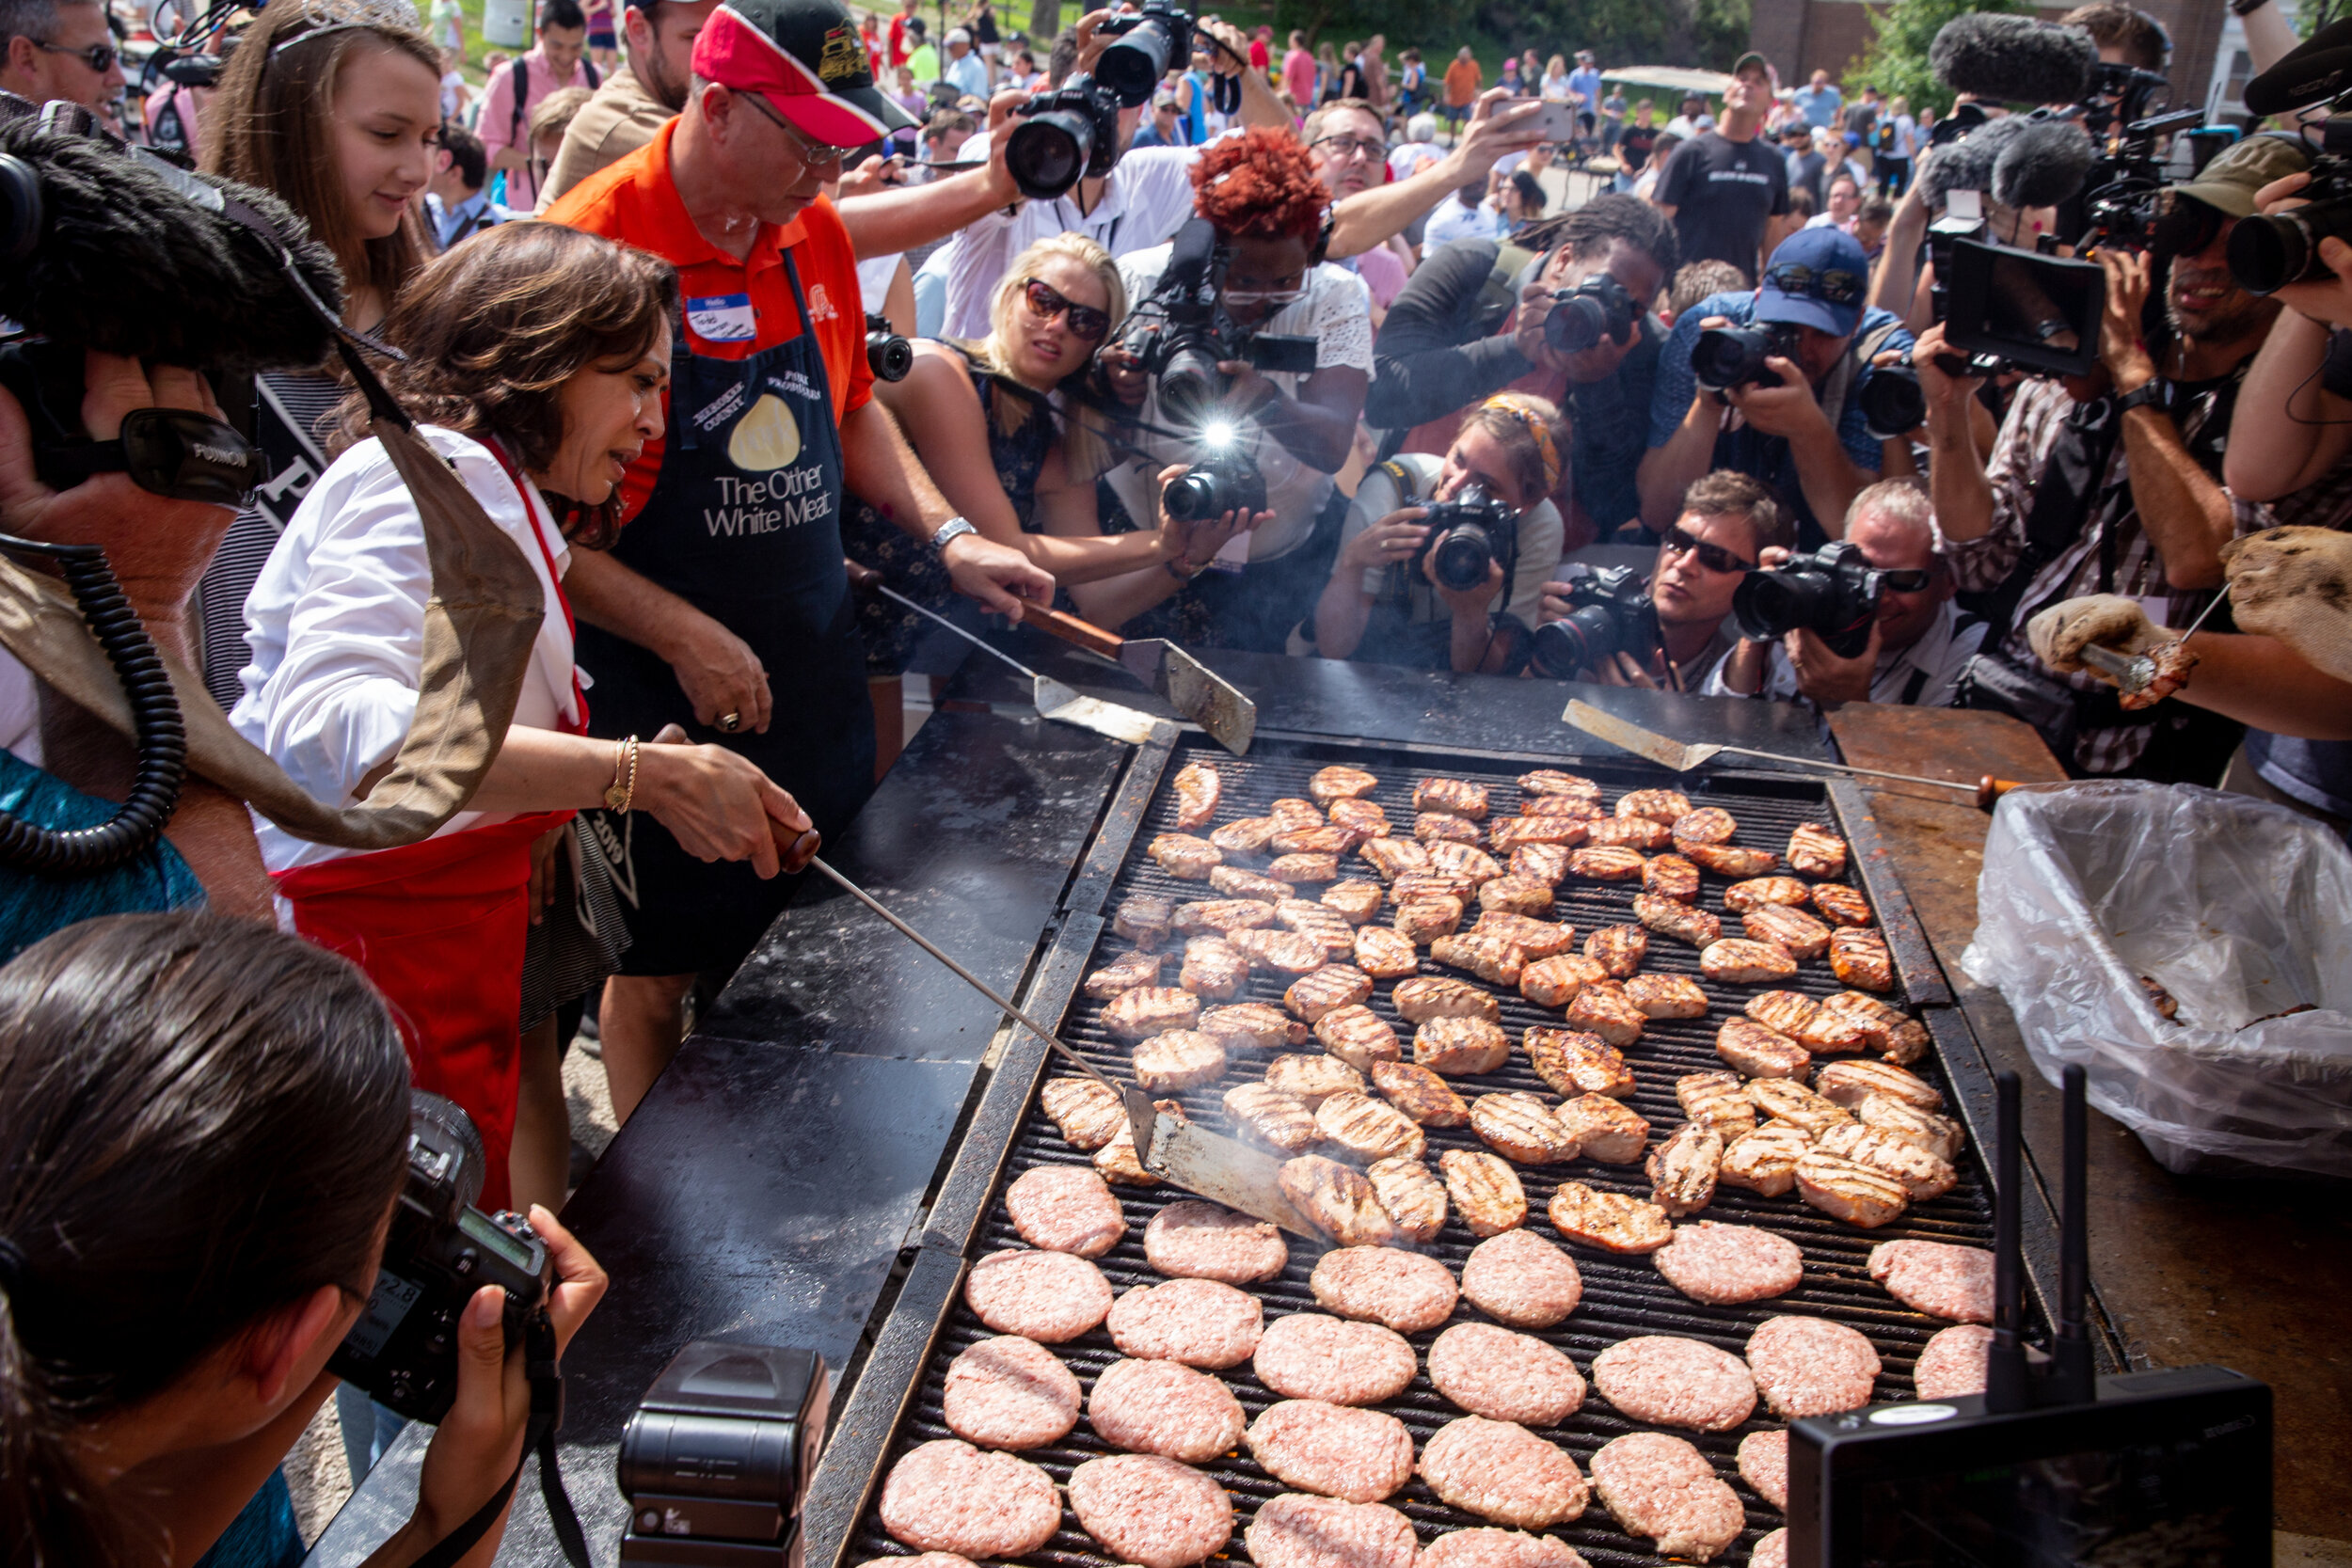  Sen. Kamala Harris flips pork chops and burgers at the Iowa State Fair on August 10, 2019 in Des Moines, Iowa.  (For Buzzfeed News) 